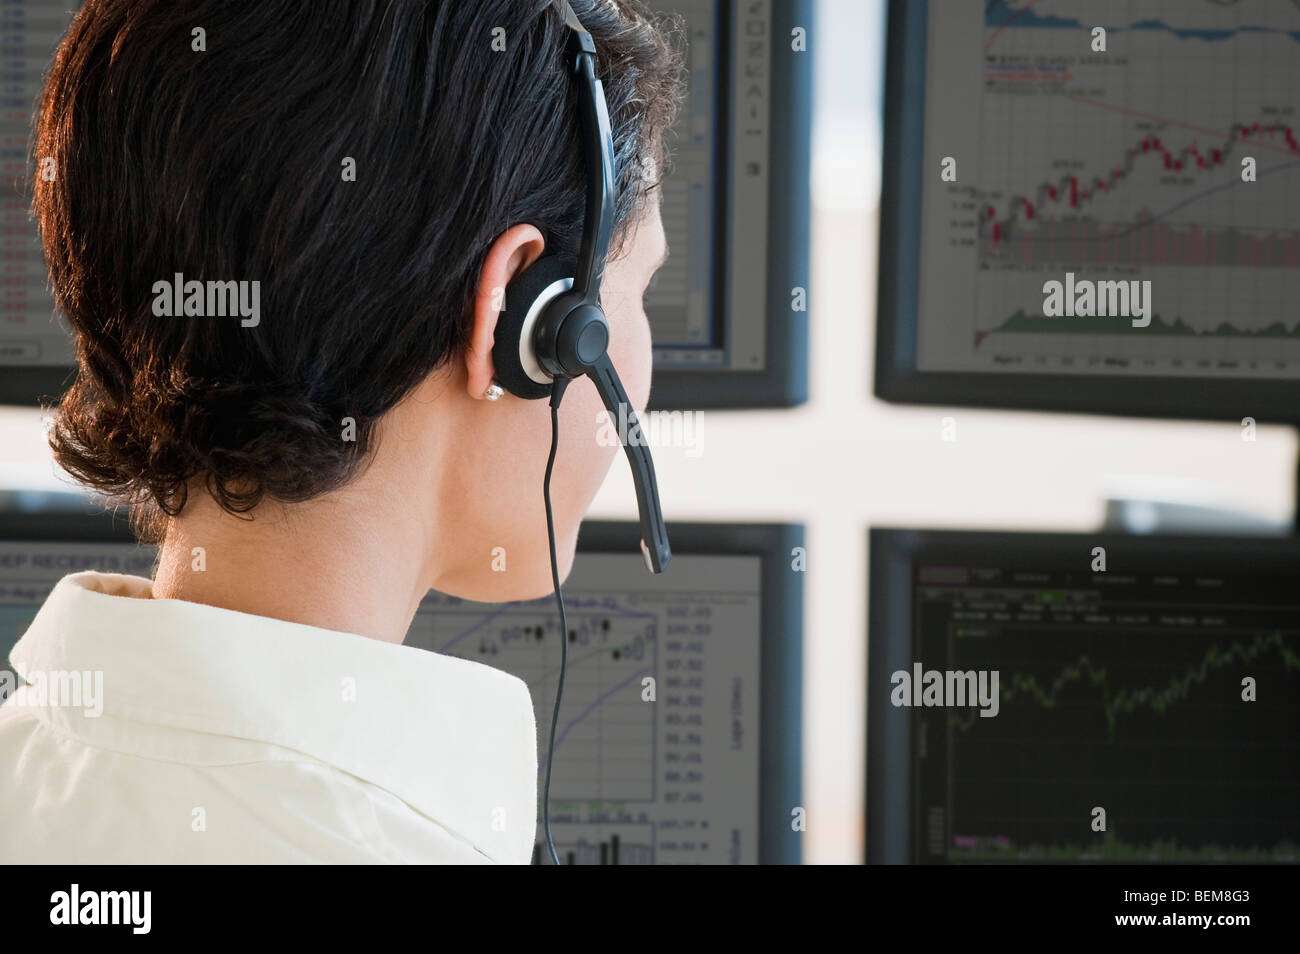 Female trader studying screens Stock Photo